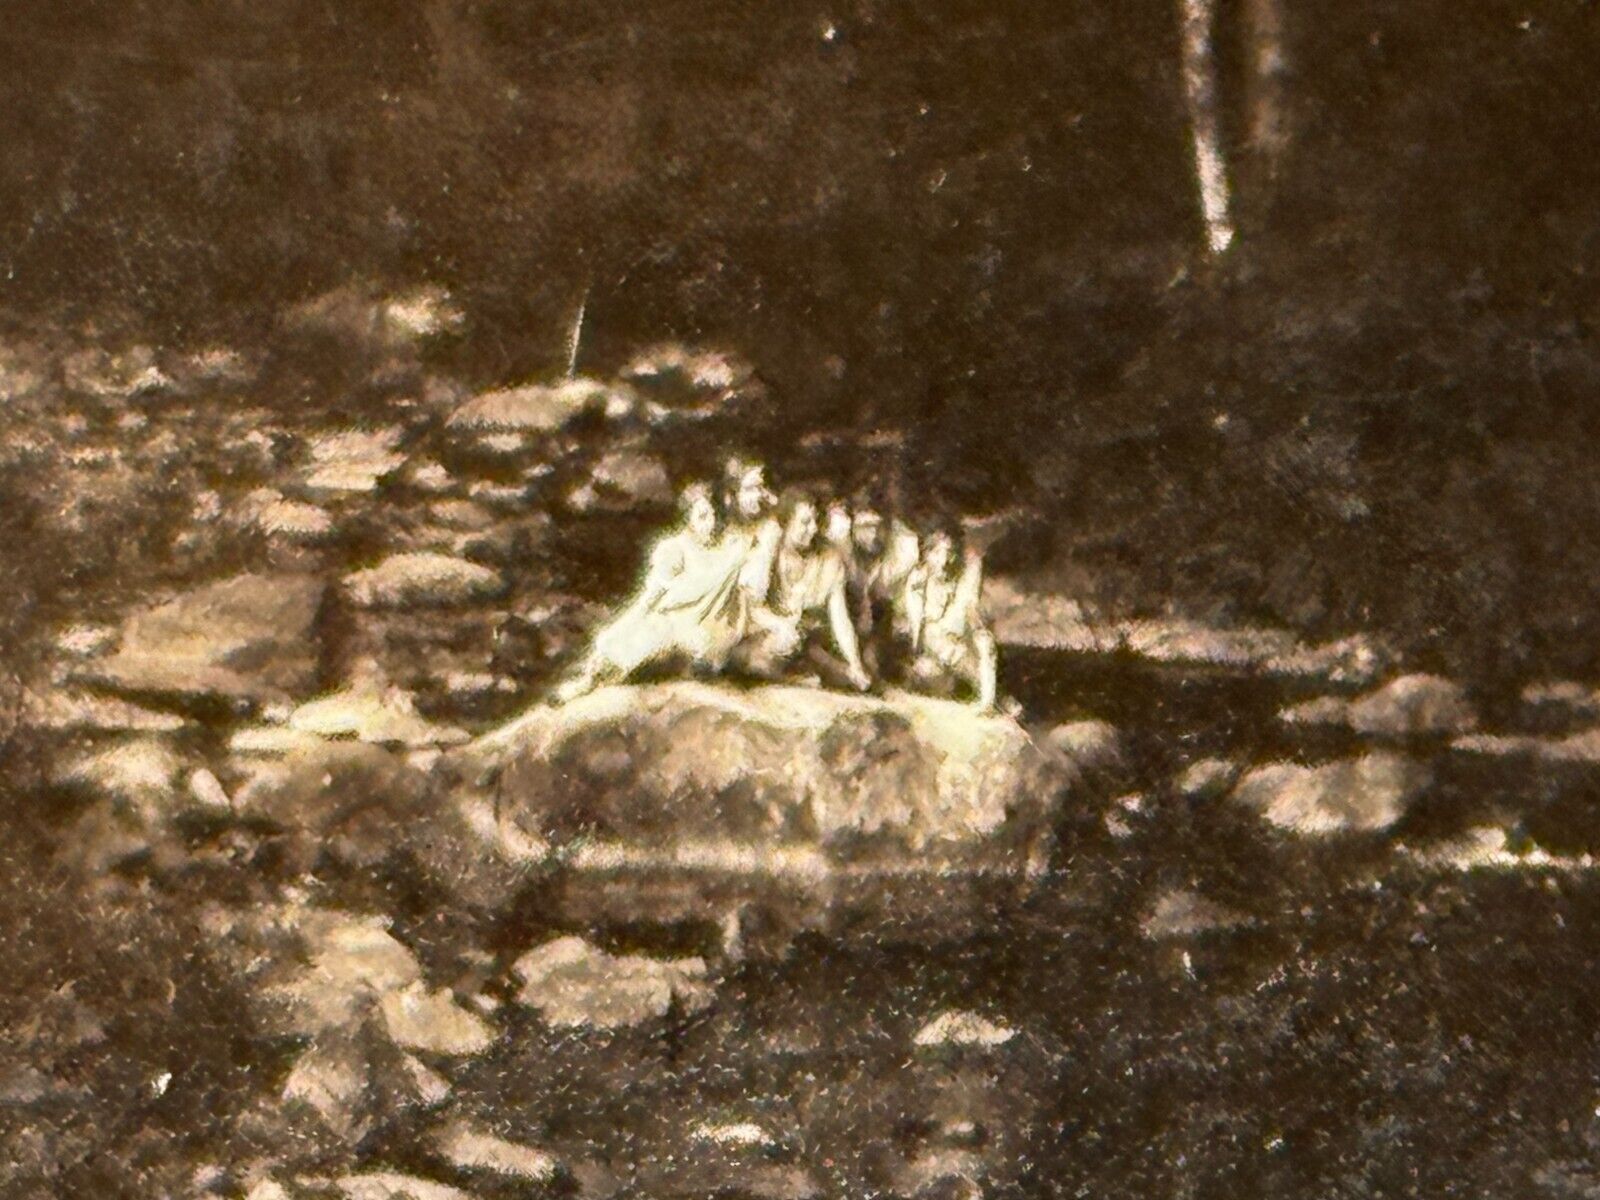 1N Photograph Group Photo From Afar Group Women Rock Stream Water 1920's